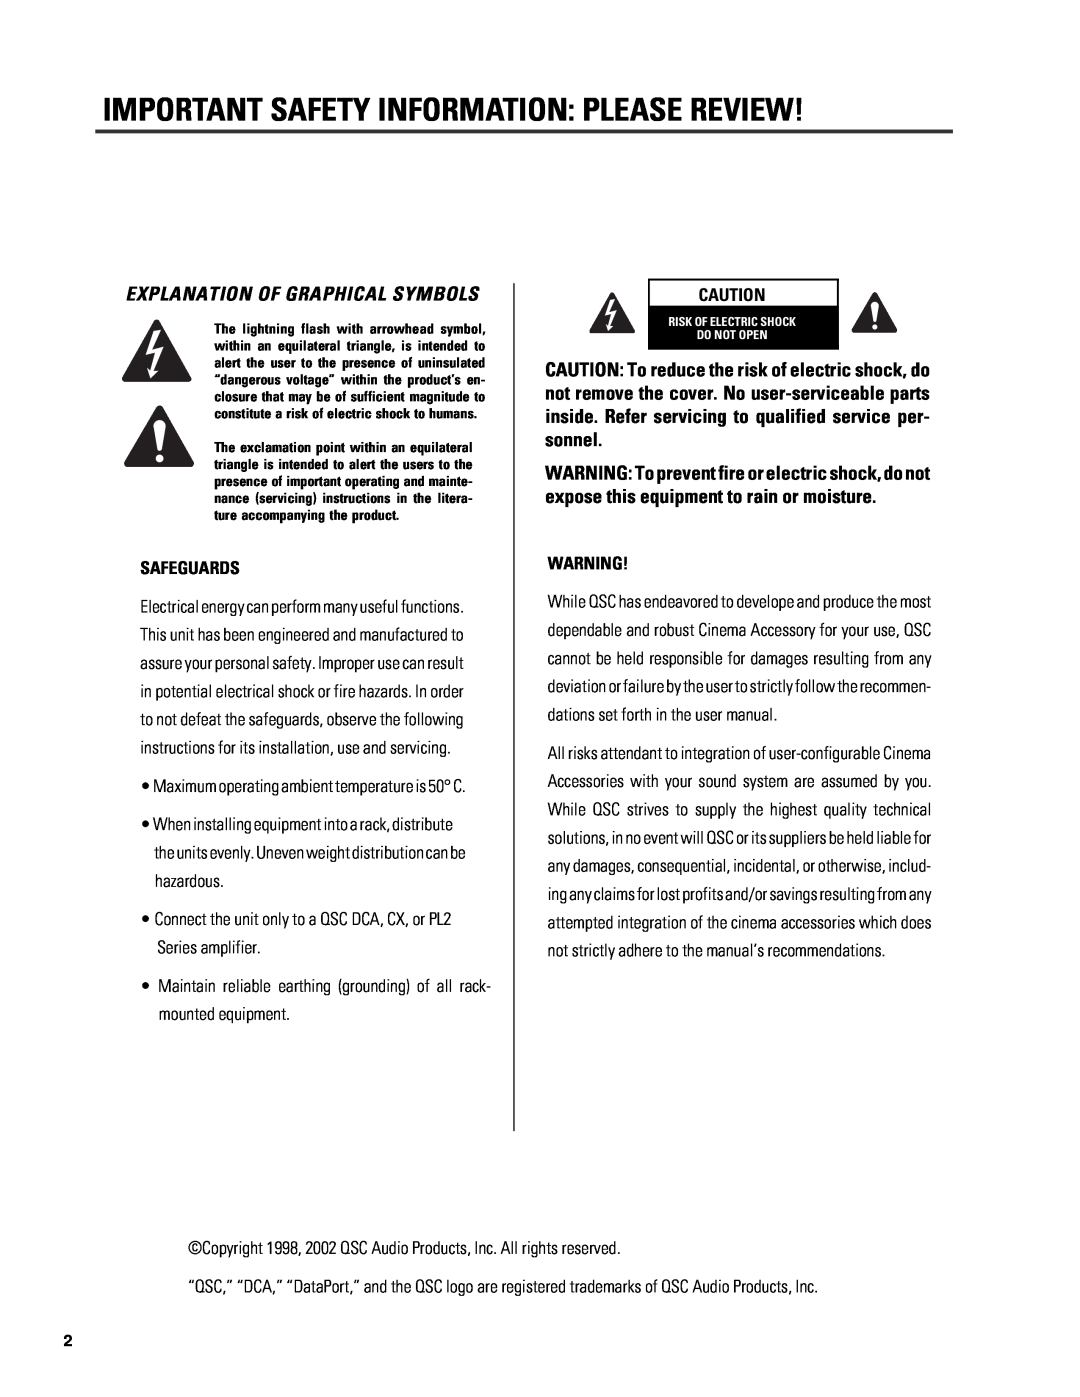 QSC Audio DCA Series user manual Important Safety Information Please Review, Explanation Of Graphical Symbols, Safeguards 